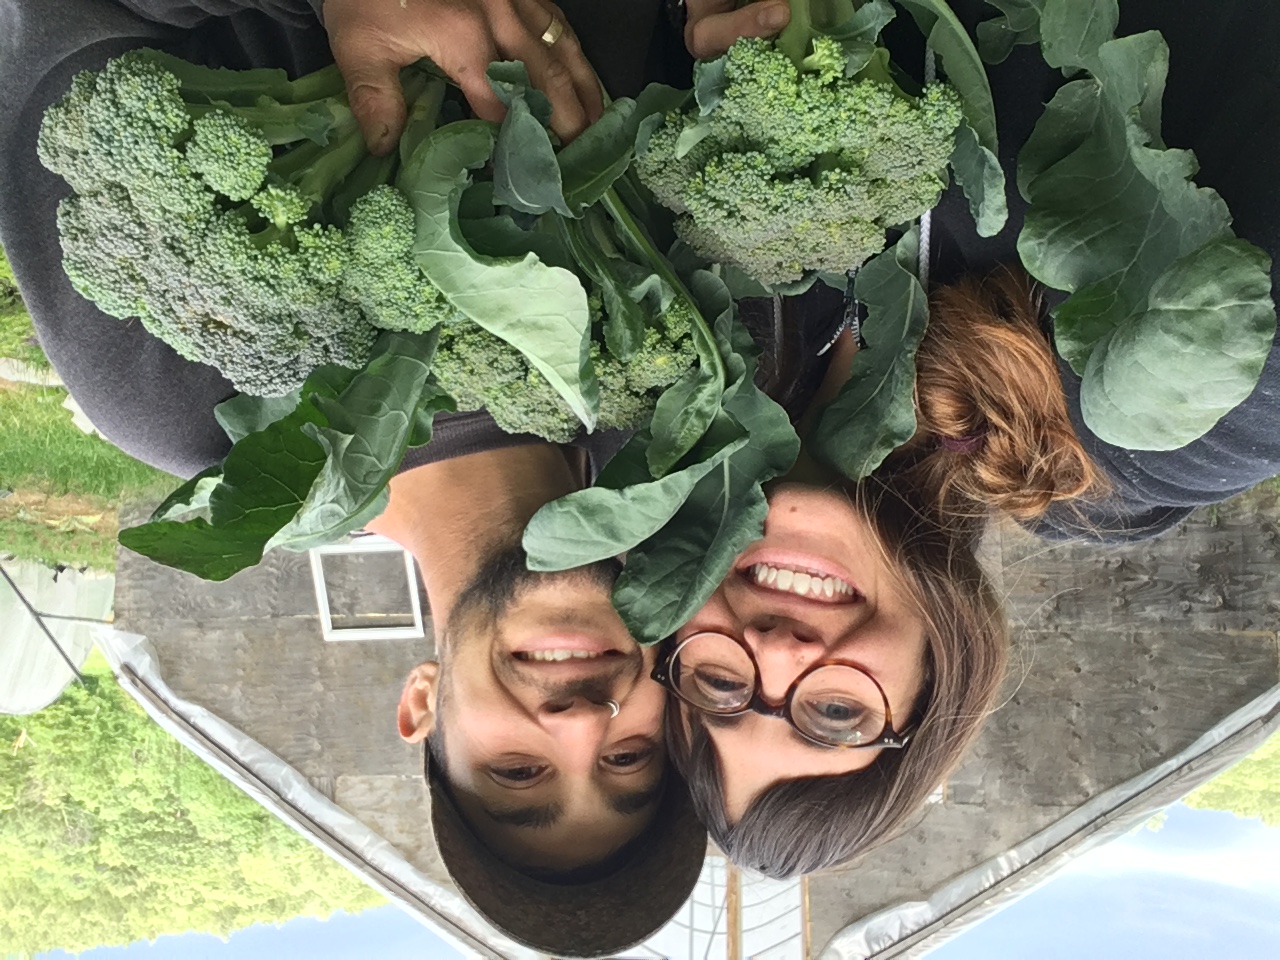 Two people hold veggies up, smiling